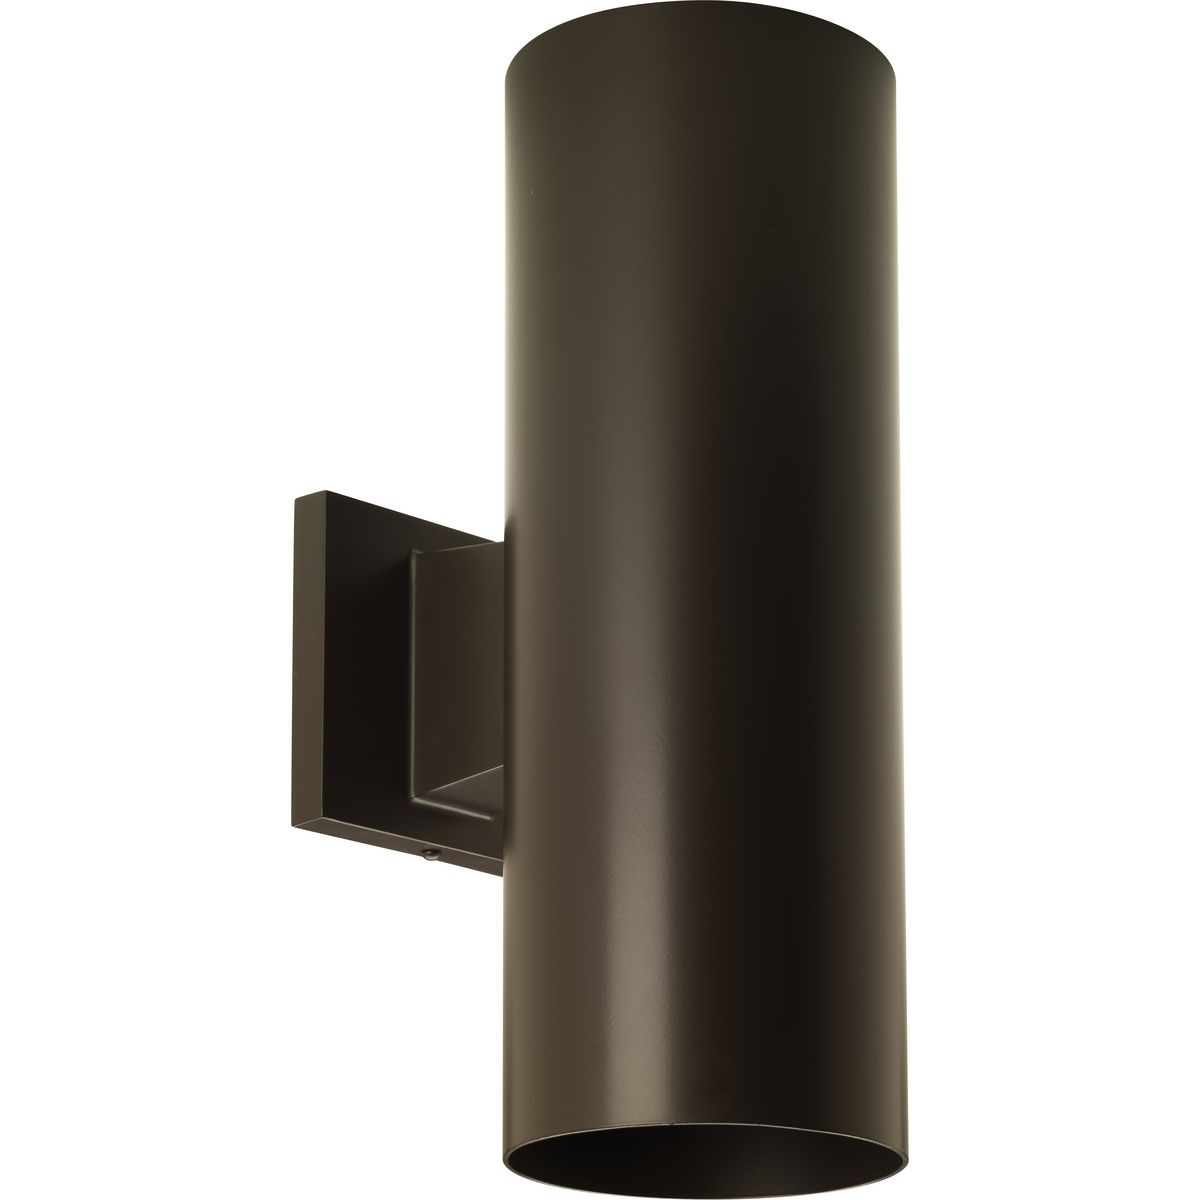 5" LED Outdoor Up/Down Cylinder - Damp Location Listed - Model P5675-82/30K